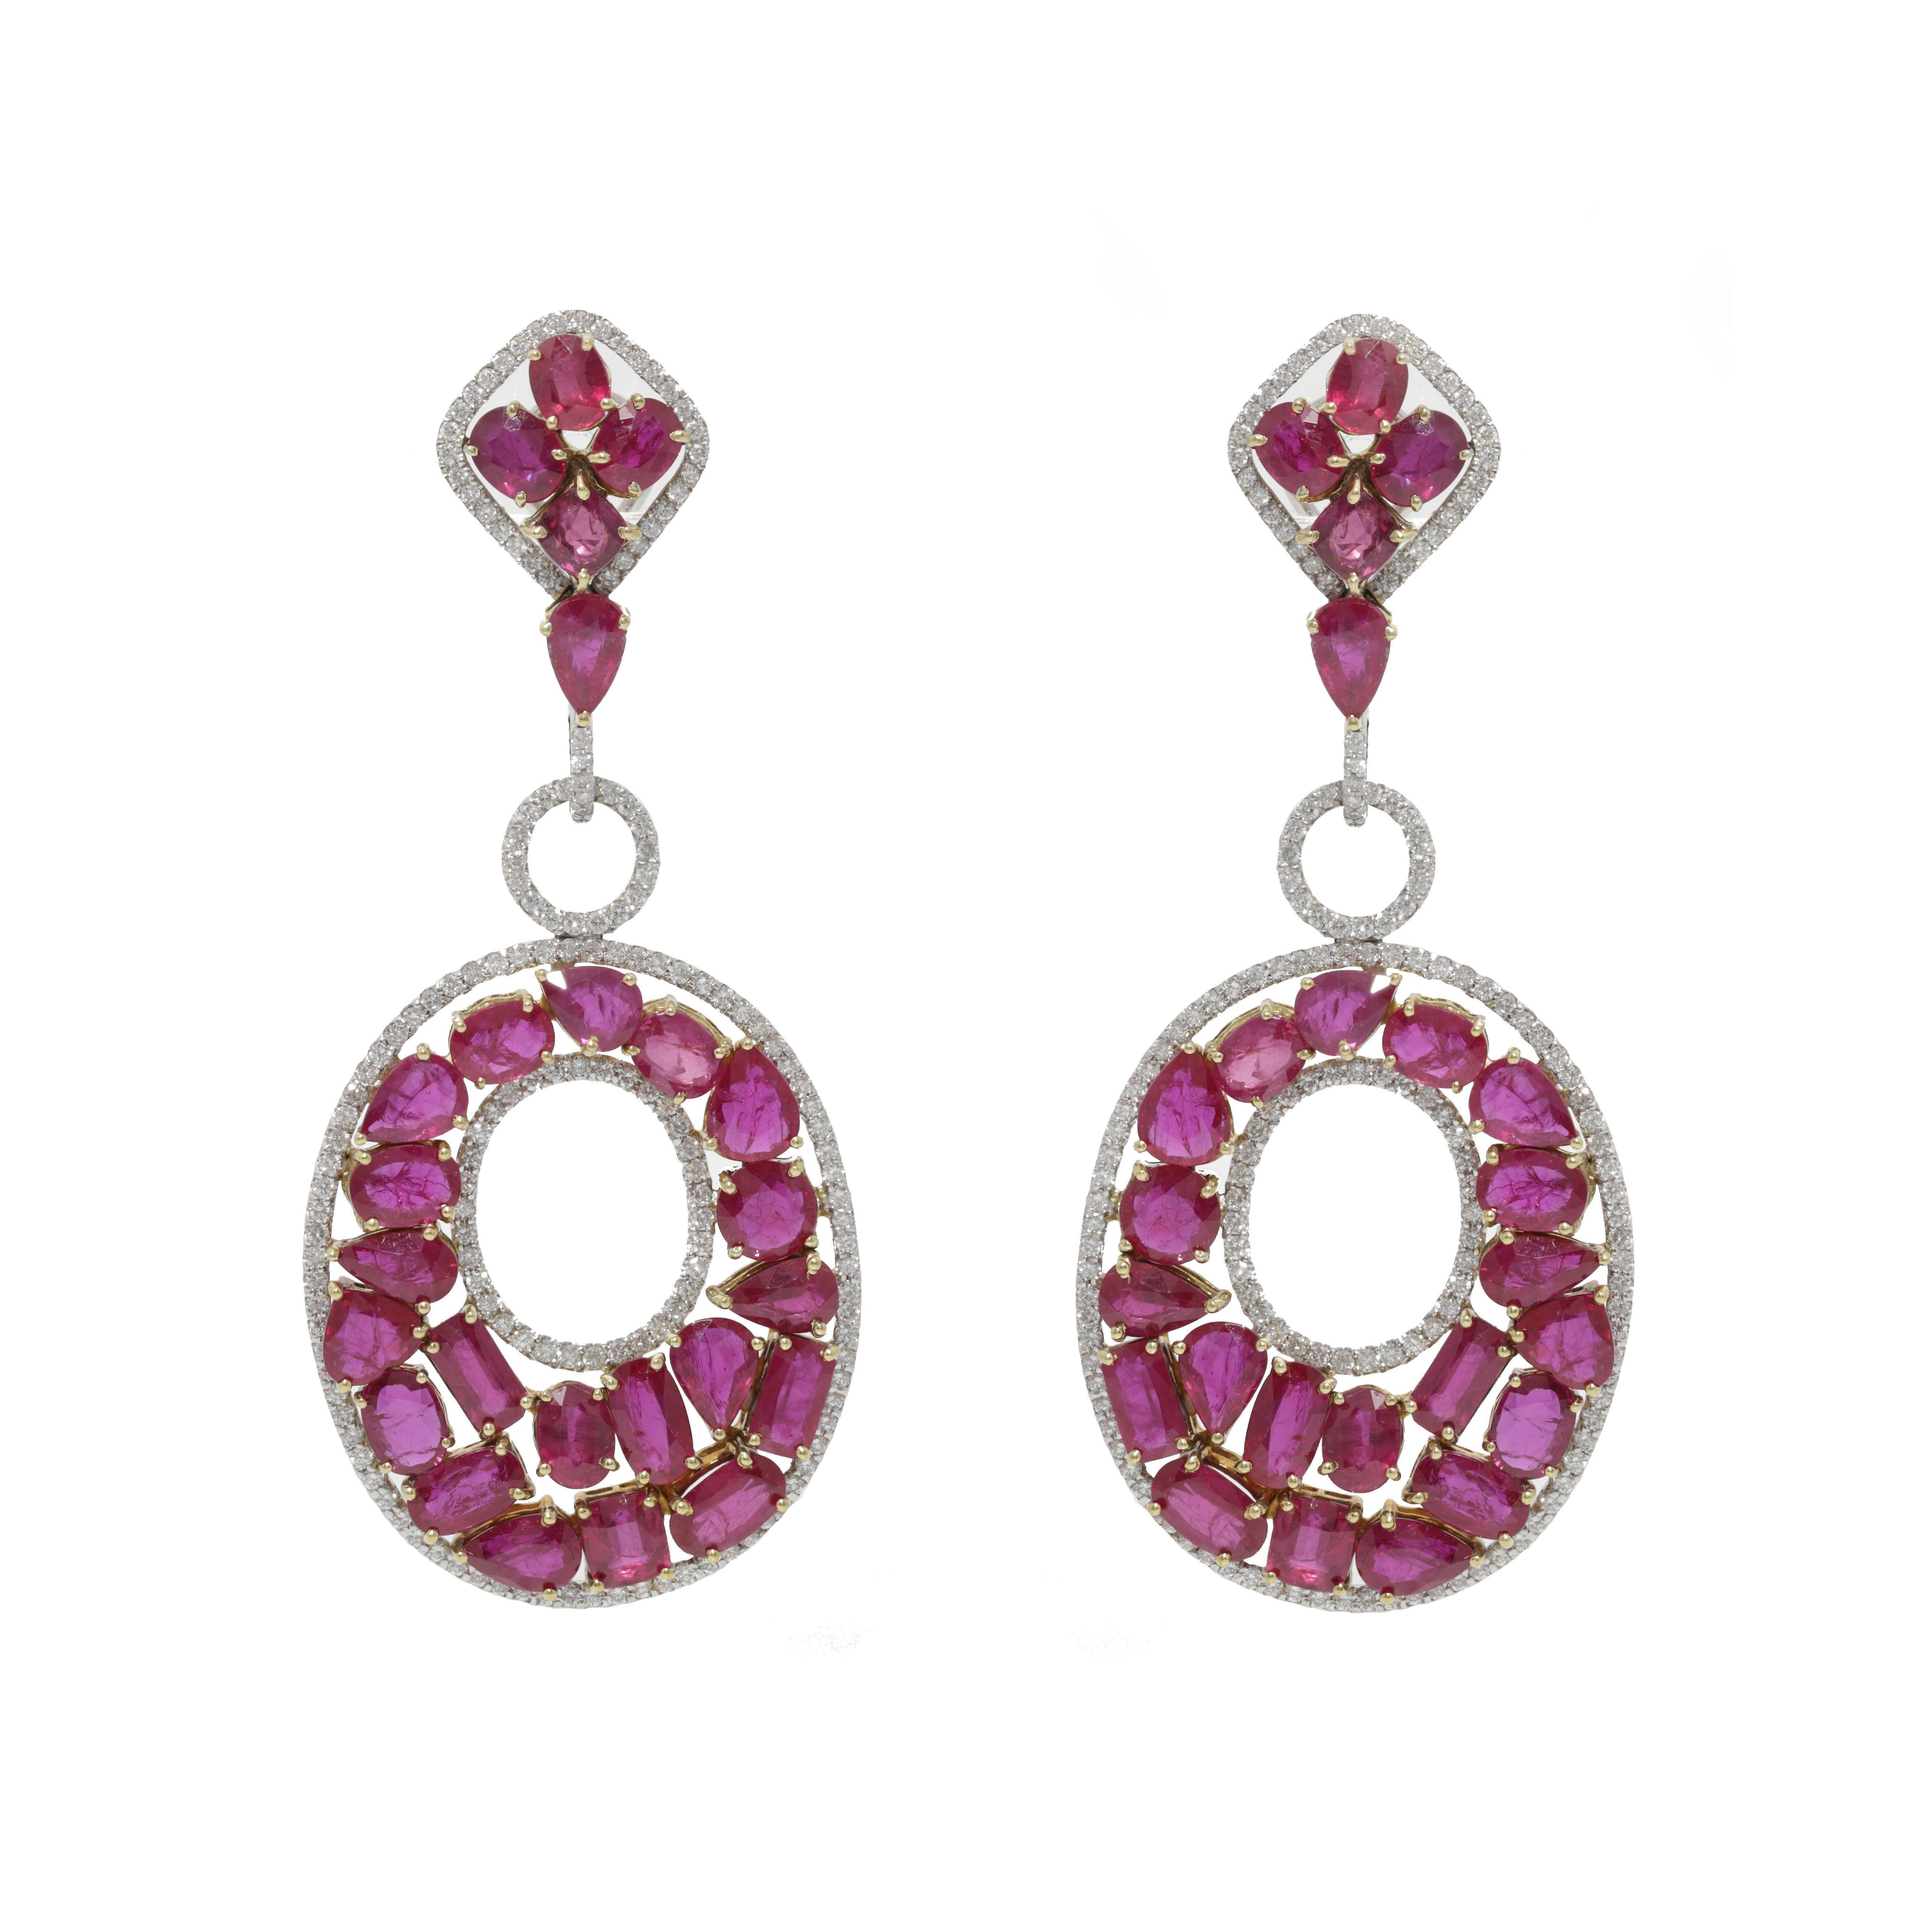 Rose Cut Diana M. 53.20 Carat Ruby and Diamond Earrings For Sale